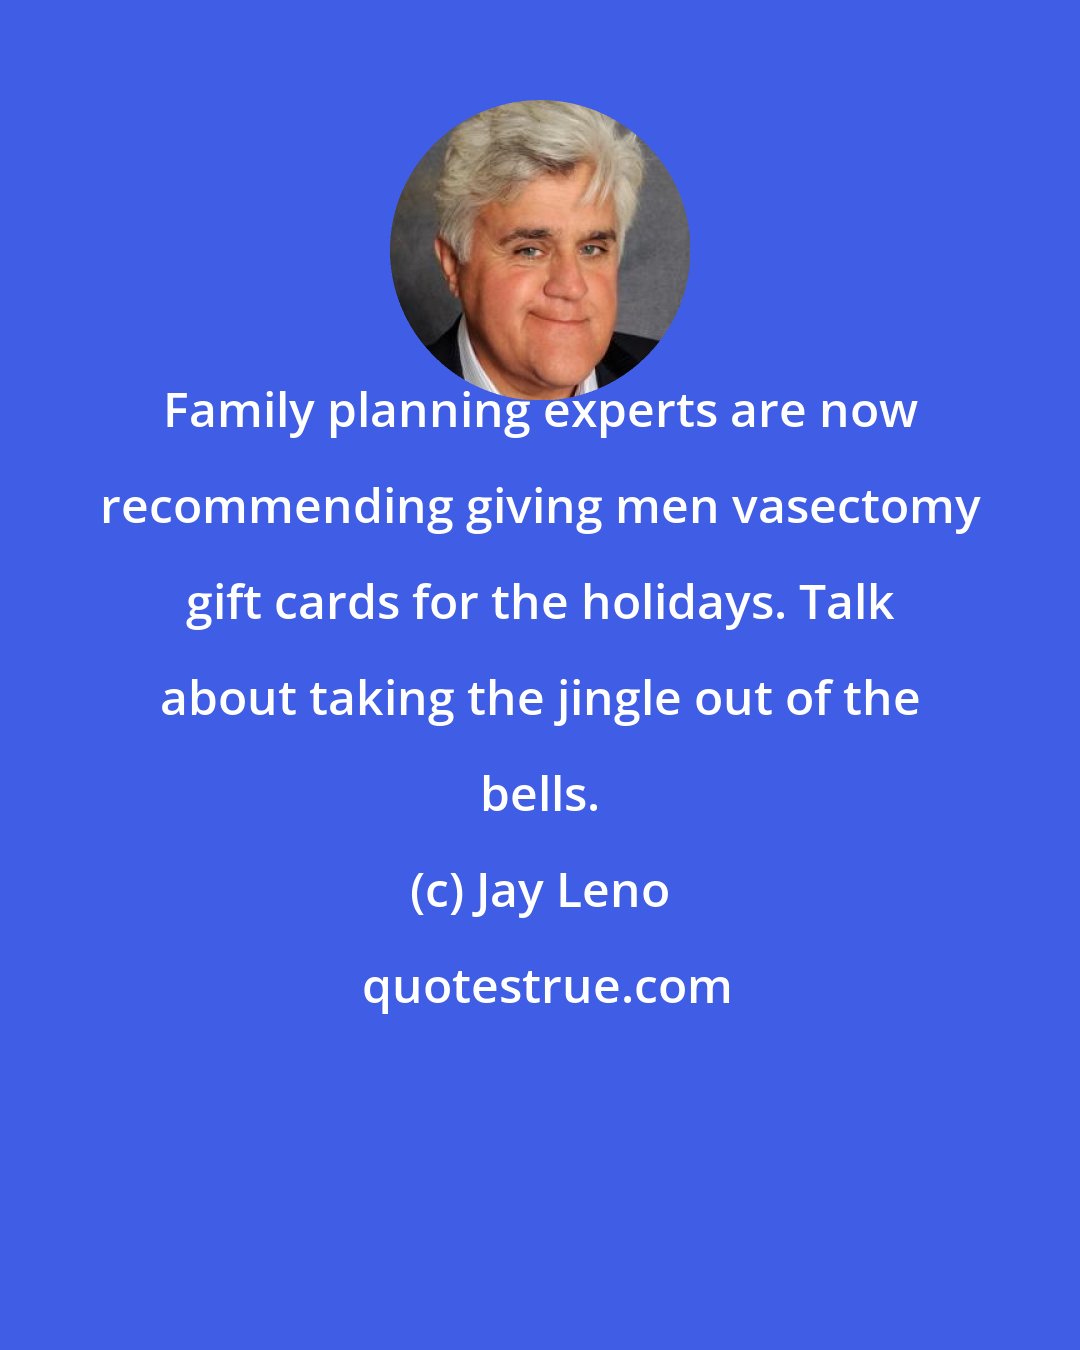 Jay Leno: Family planning experts are now recommending giving men vasectomy gift cards for the holidays. Talk about taking the jingle out of the bells.